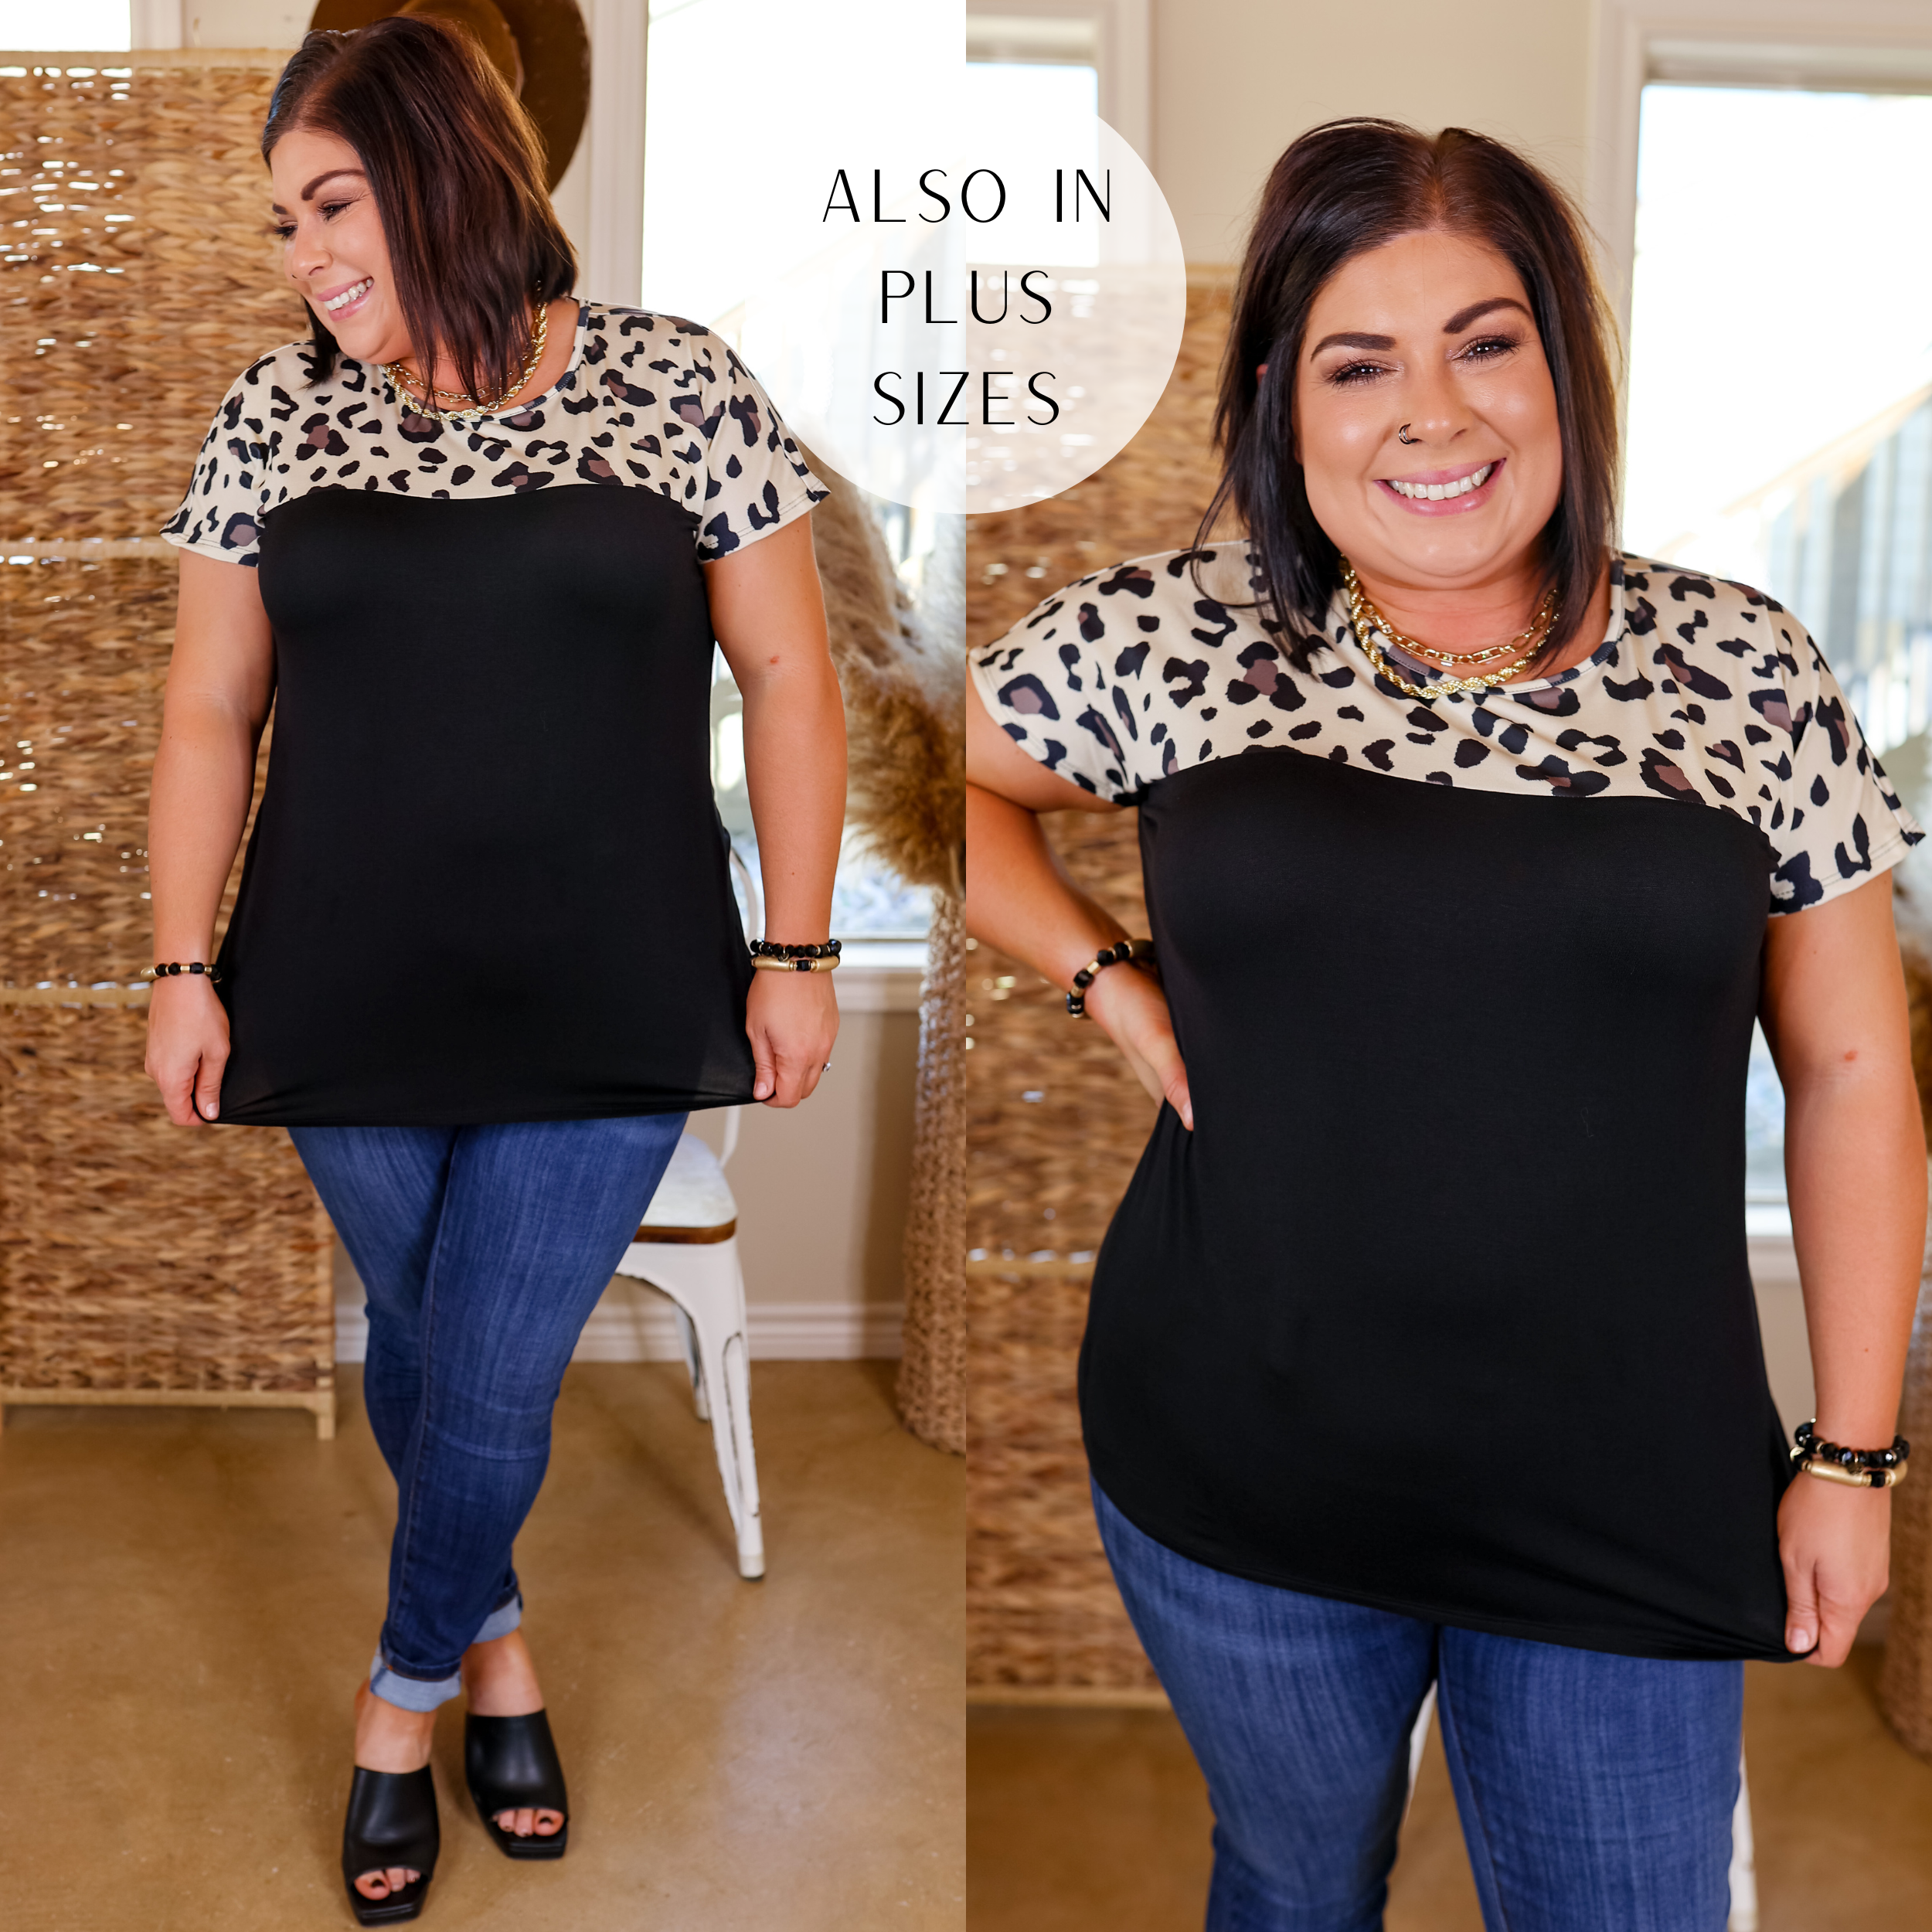 Model is wearing a short sleeve top with a leopard print across the upper portion. The model has this top paired with skinny jeans, black heels, and gold jewelry.